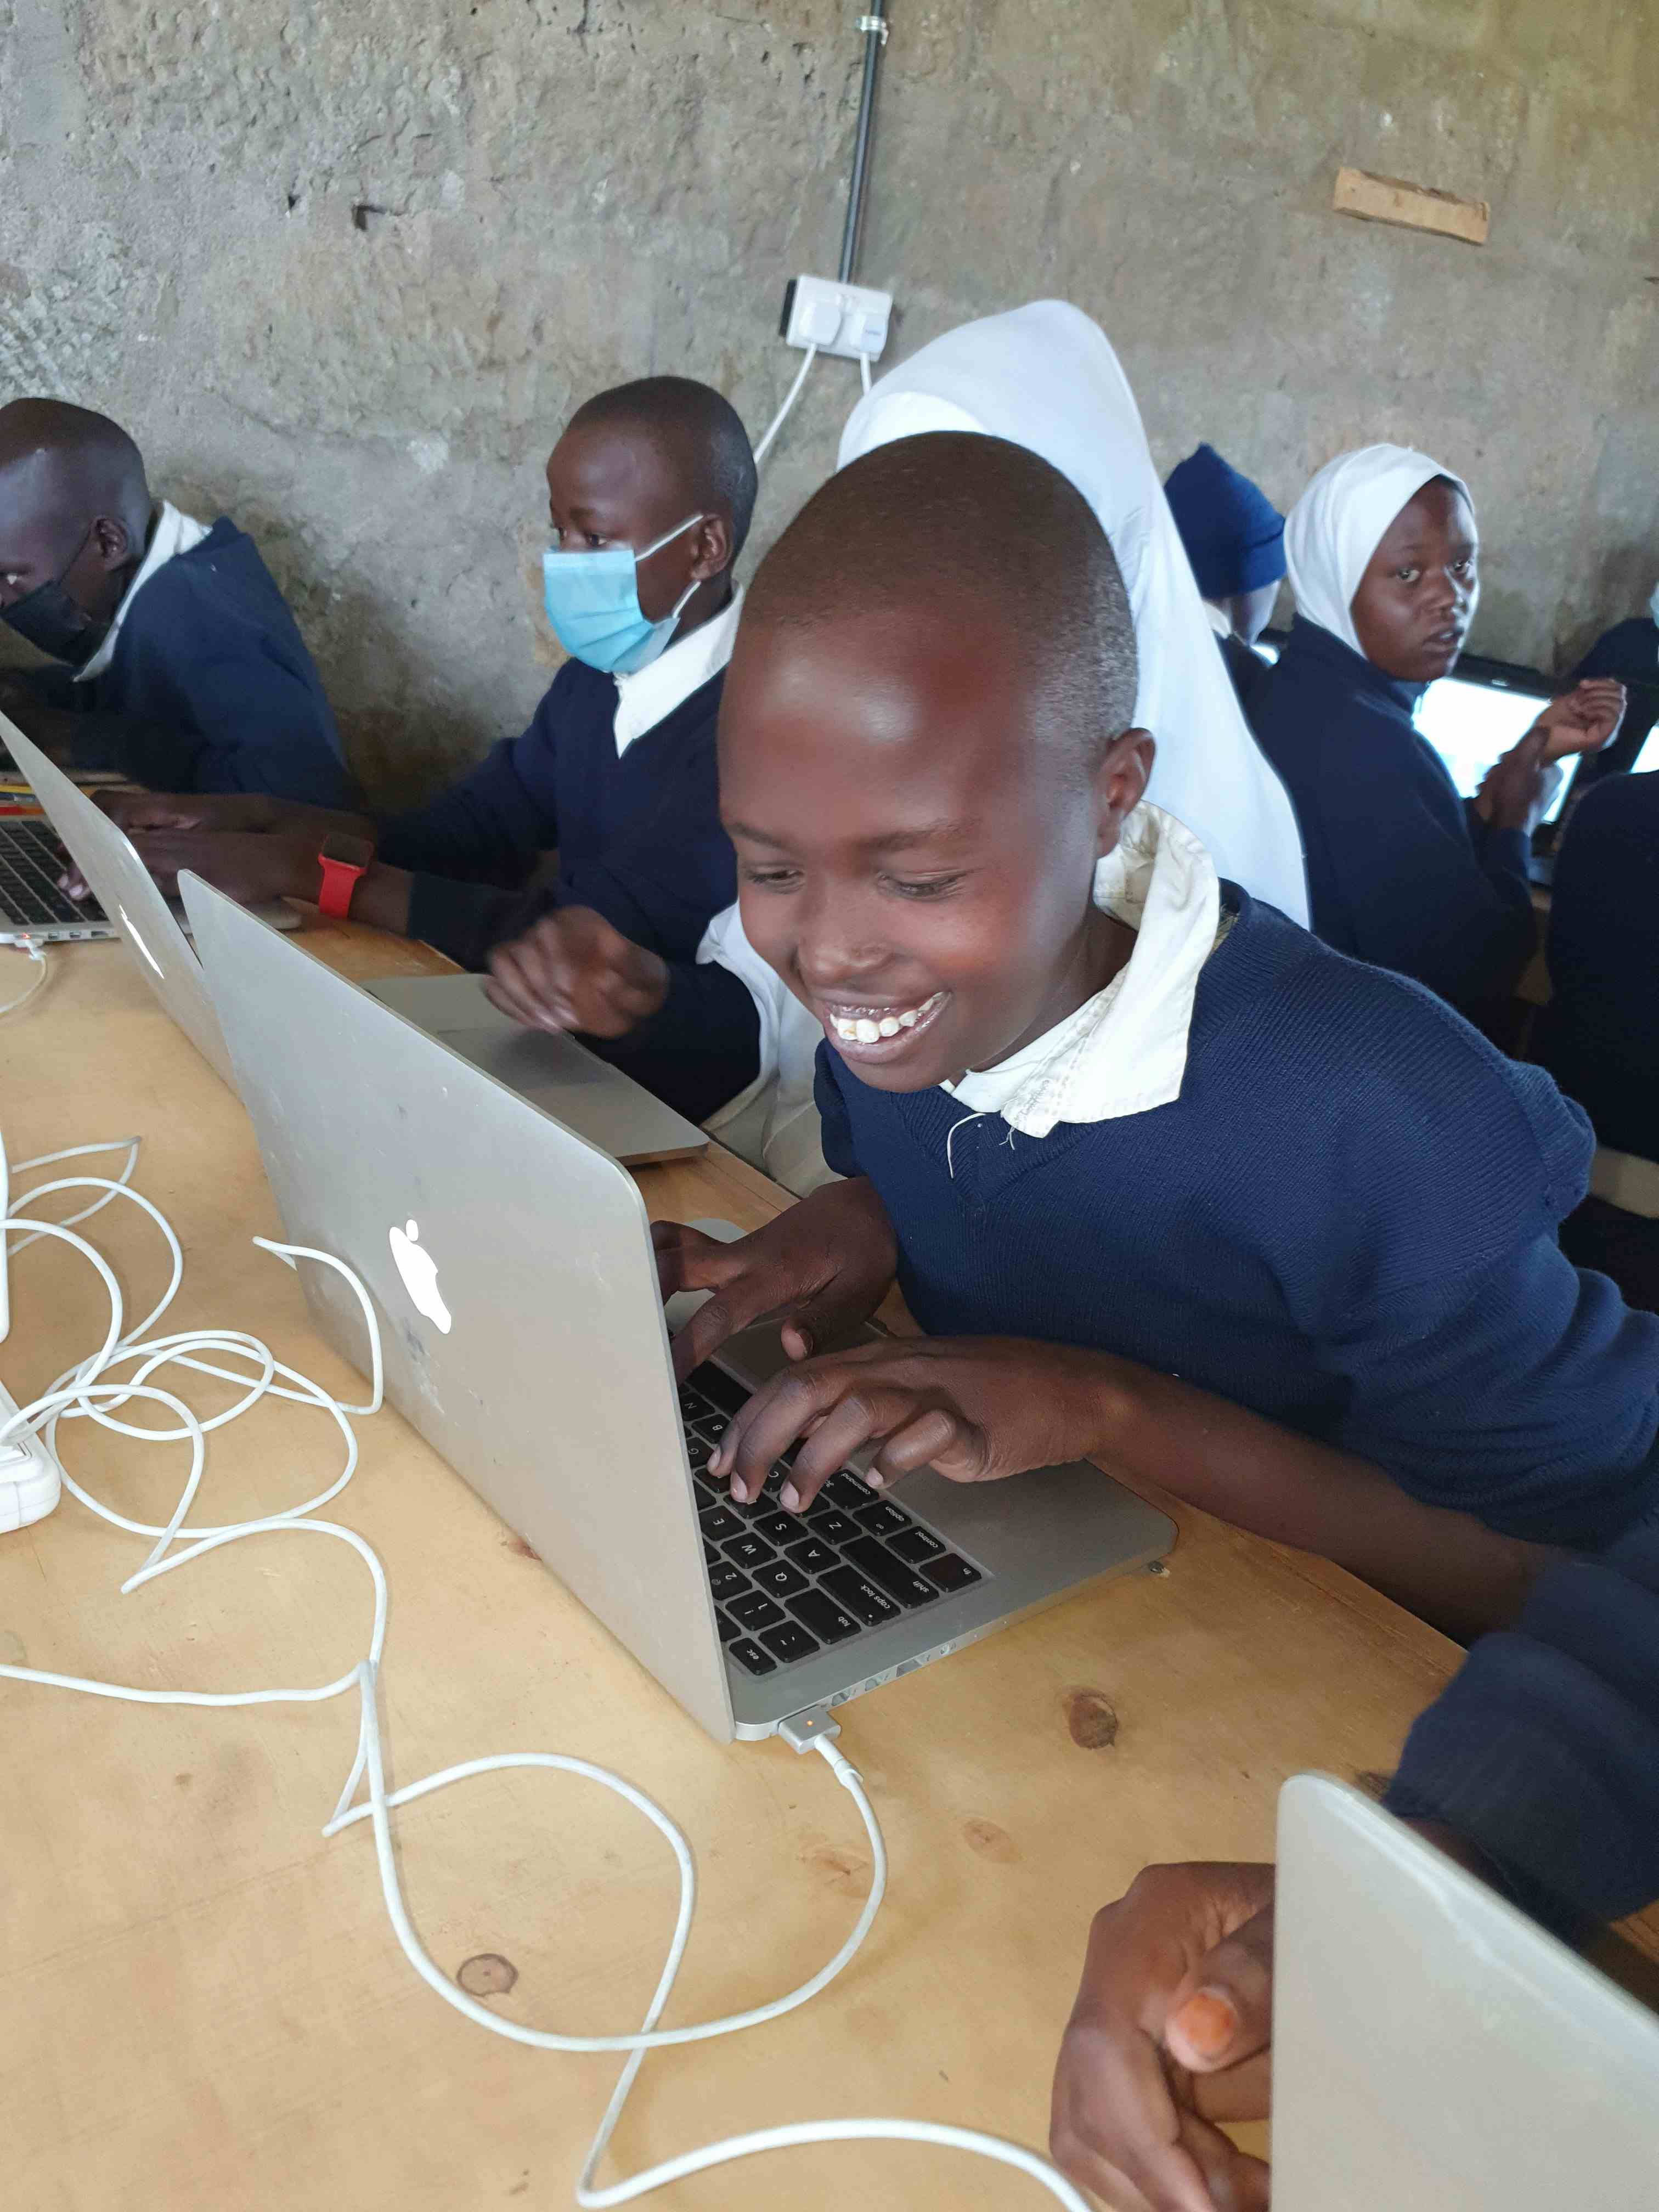 Student at sainty mary's touchtyping